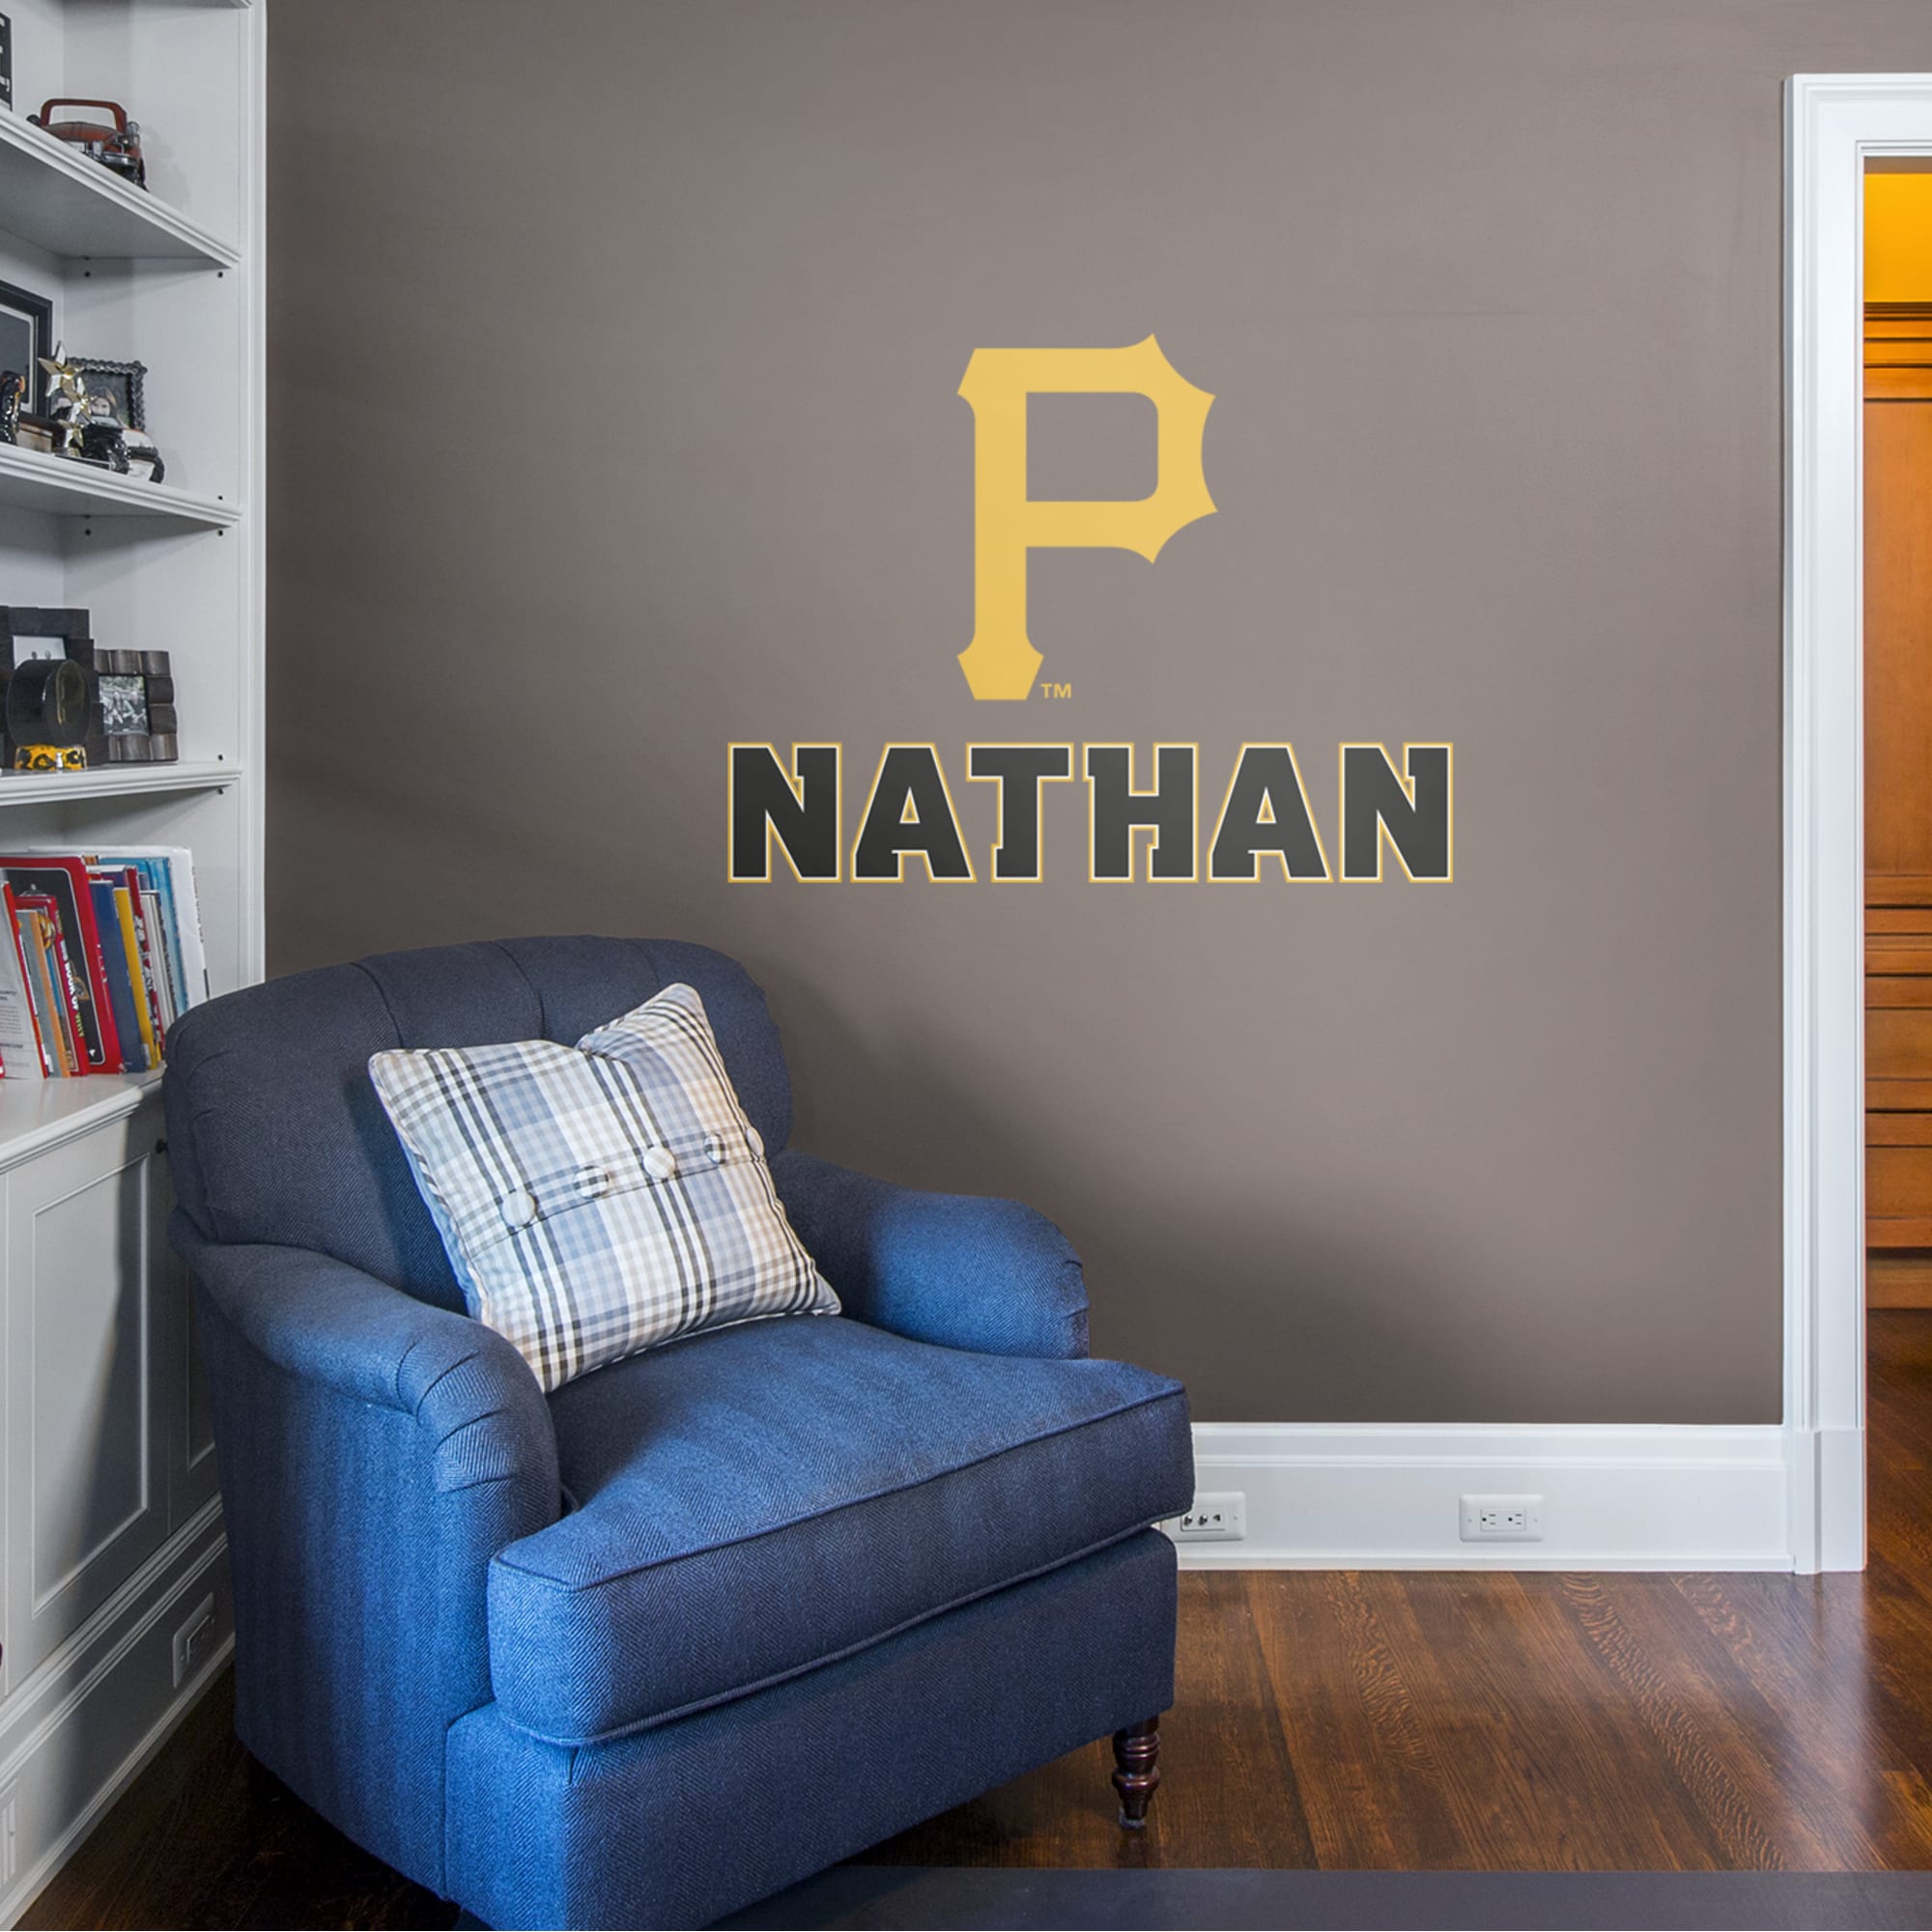 Pittsburgh Pirates: Stacked Personalized Name - Officially Licensed MLB Transfer Decal in Black (52"W x 39.5"H) by Fathead | Vin